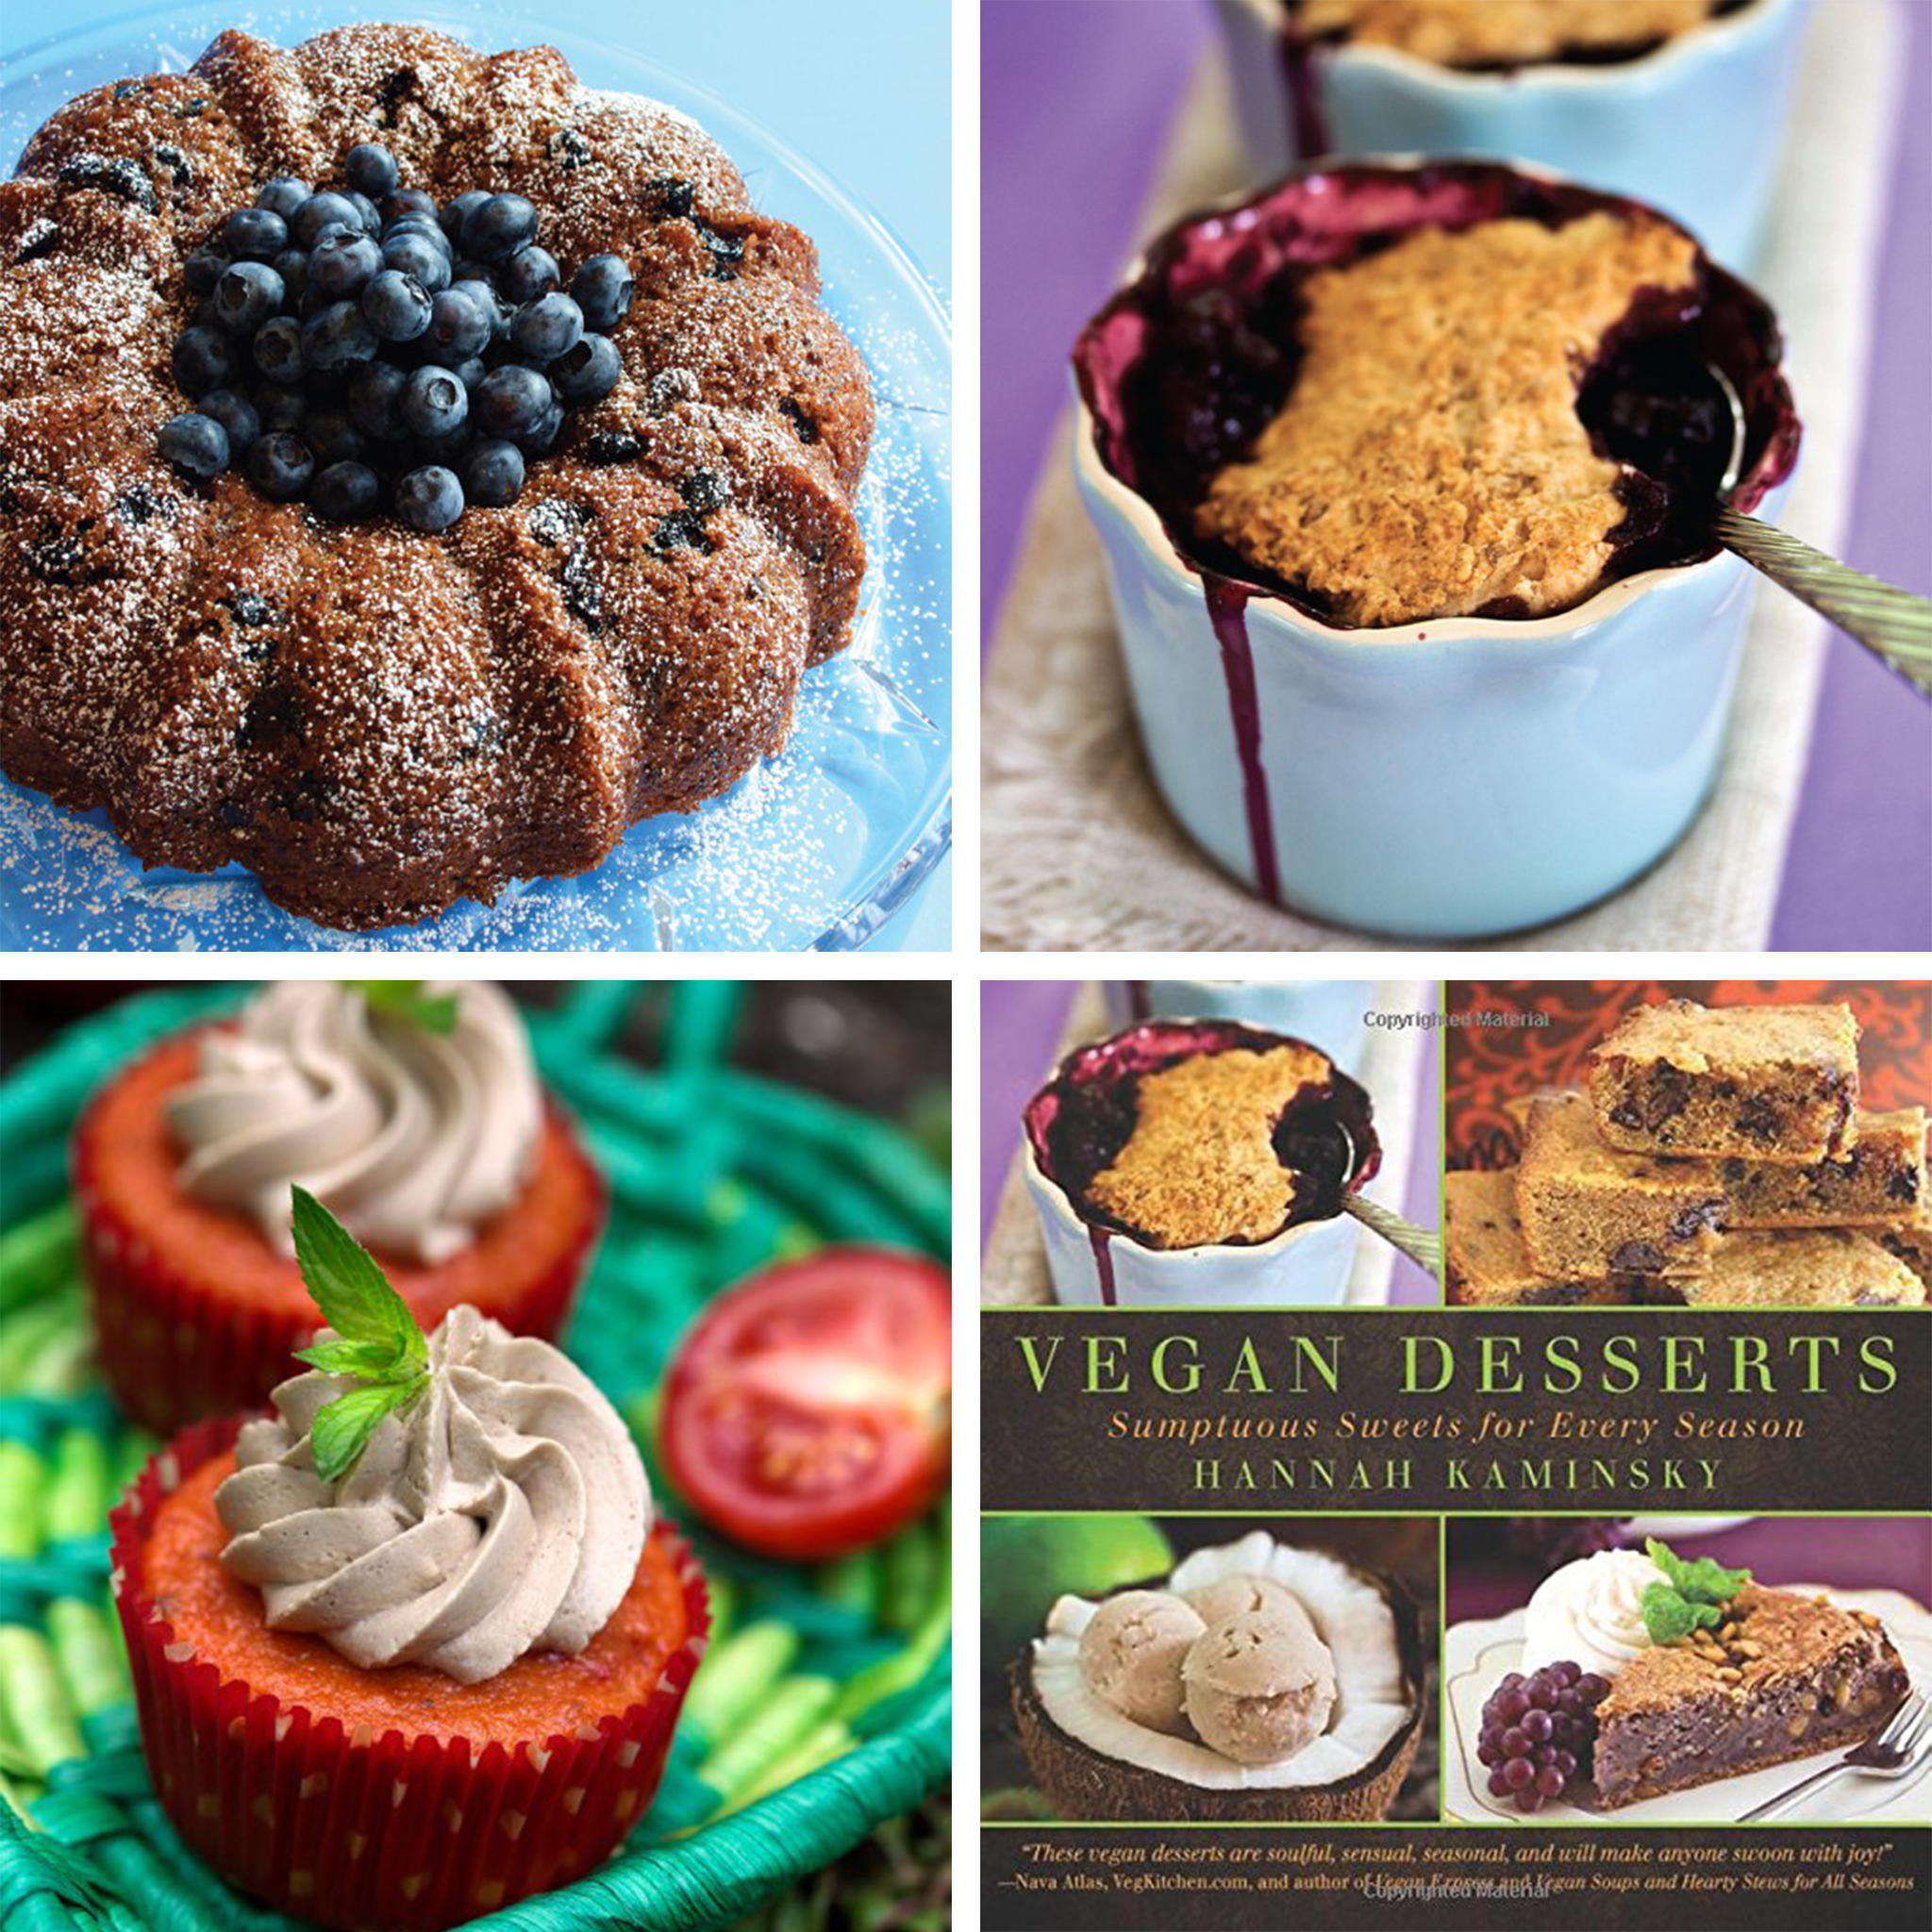 True Blue Bundt Cake, Tomato Cakes with Balsamic Frosting, and Cherry-Berry Peanut Butter Cobbler from Vegan Desserts